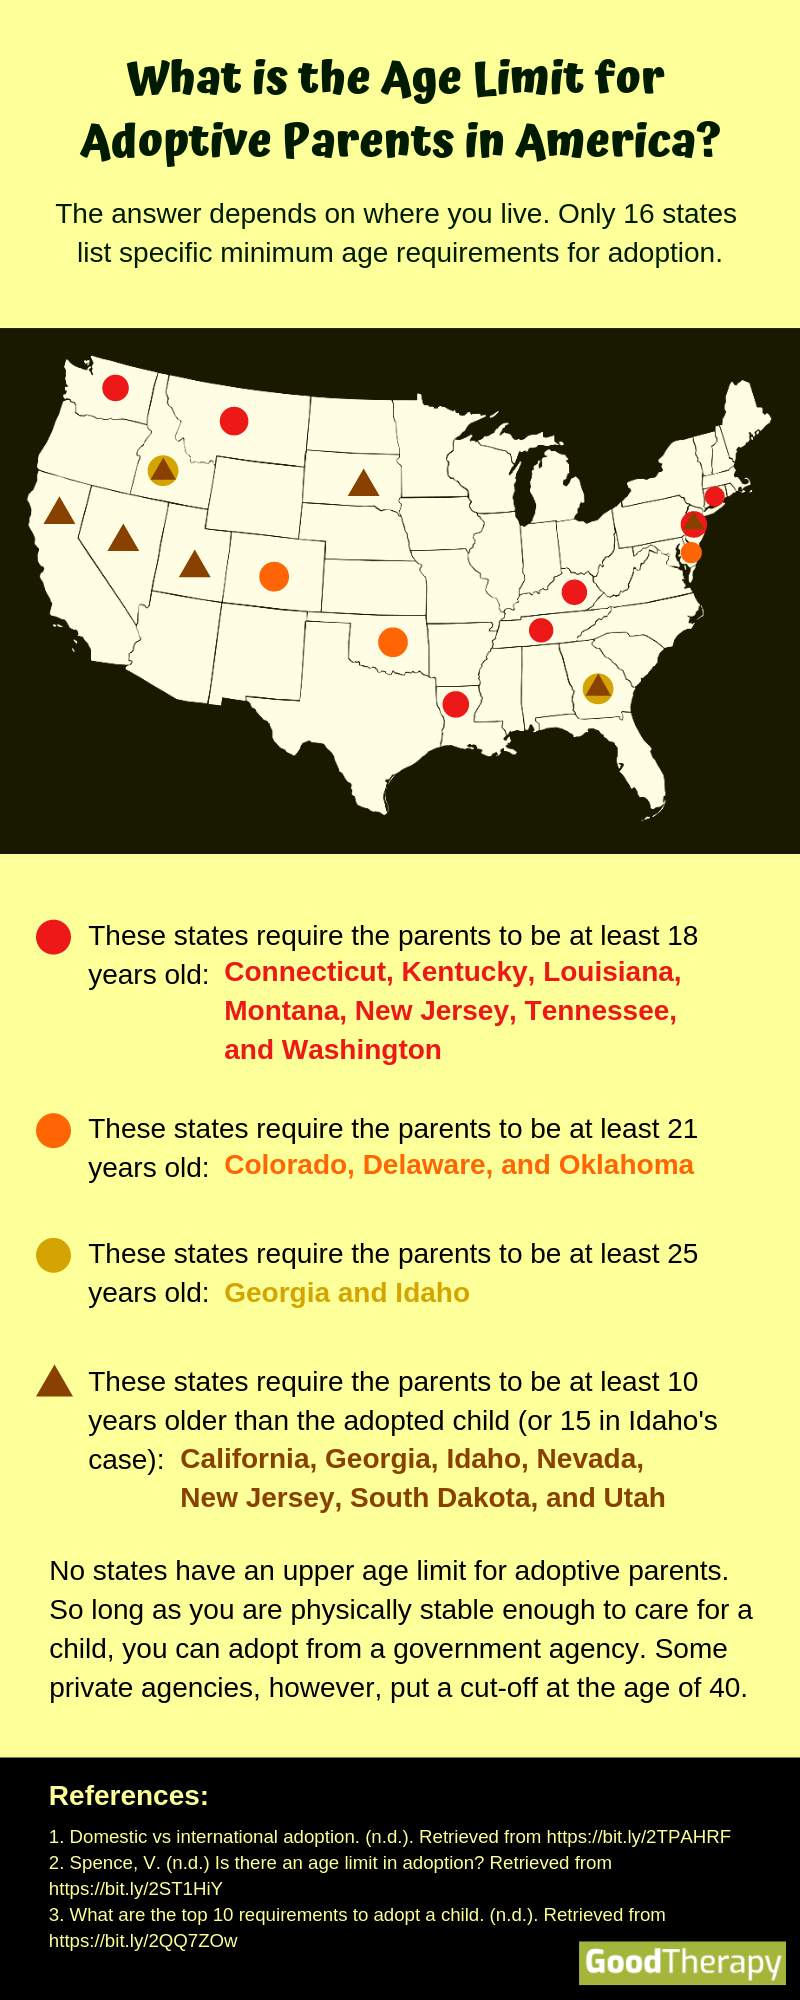 What is the Age Limit for Adoptive Parents in America